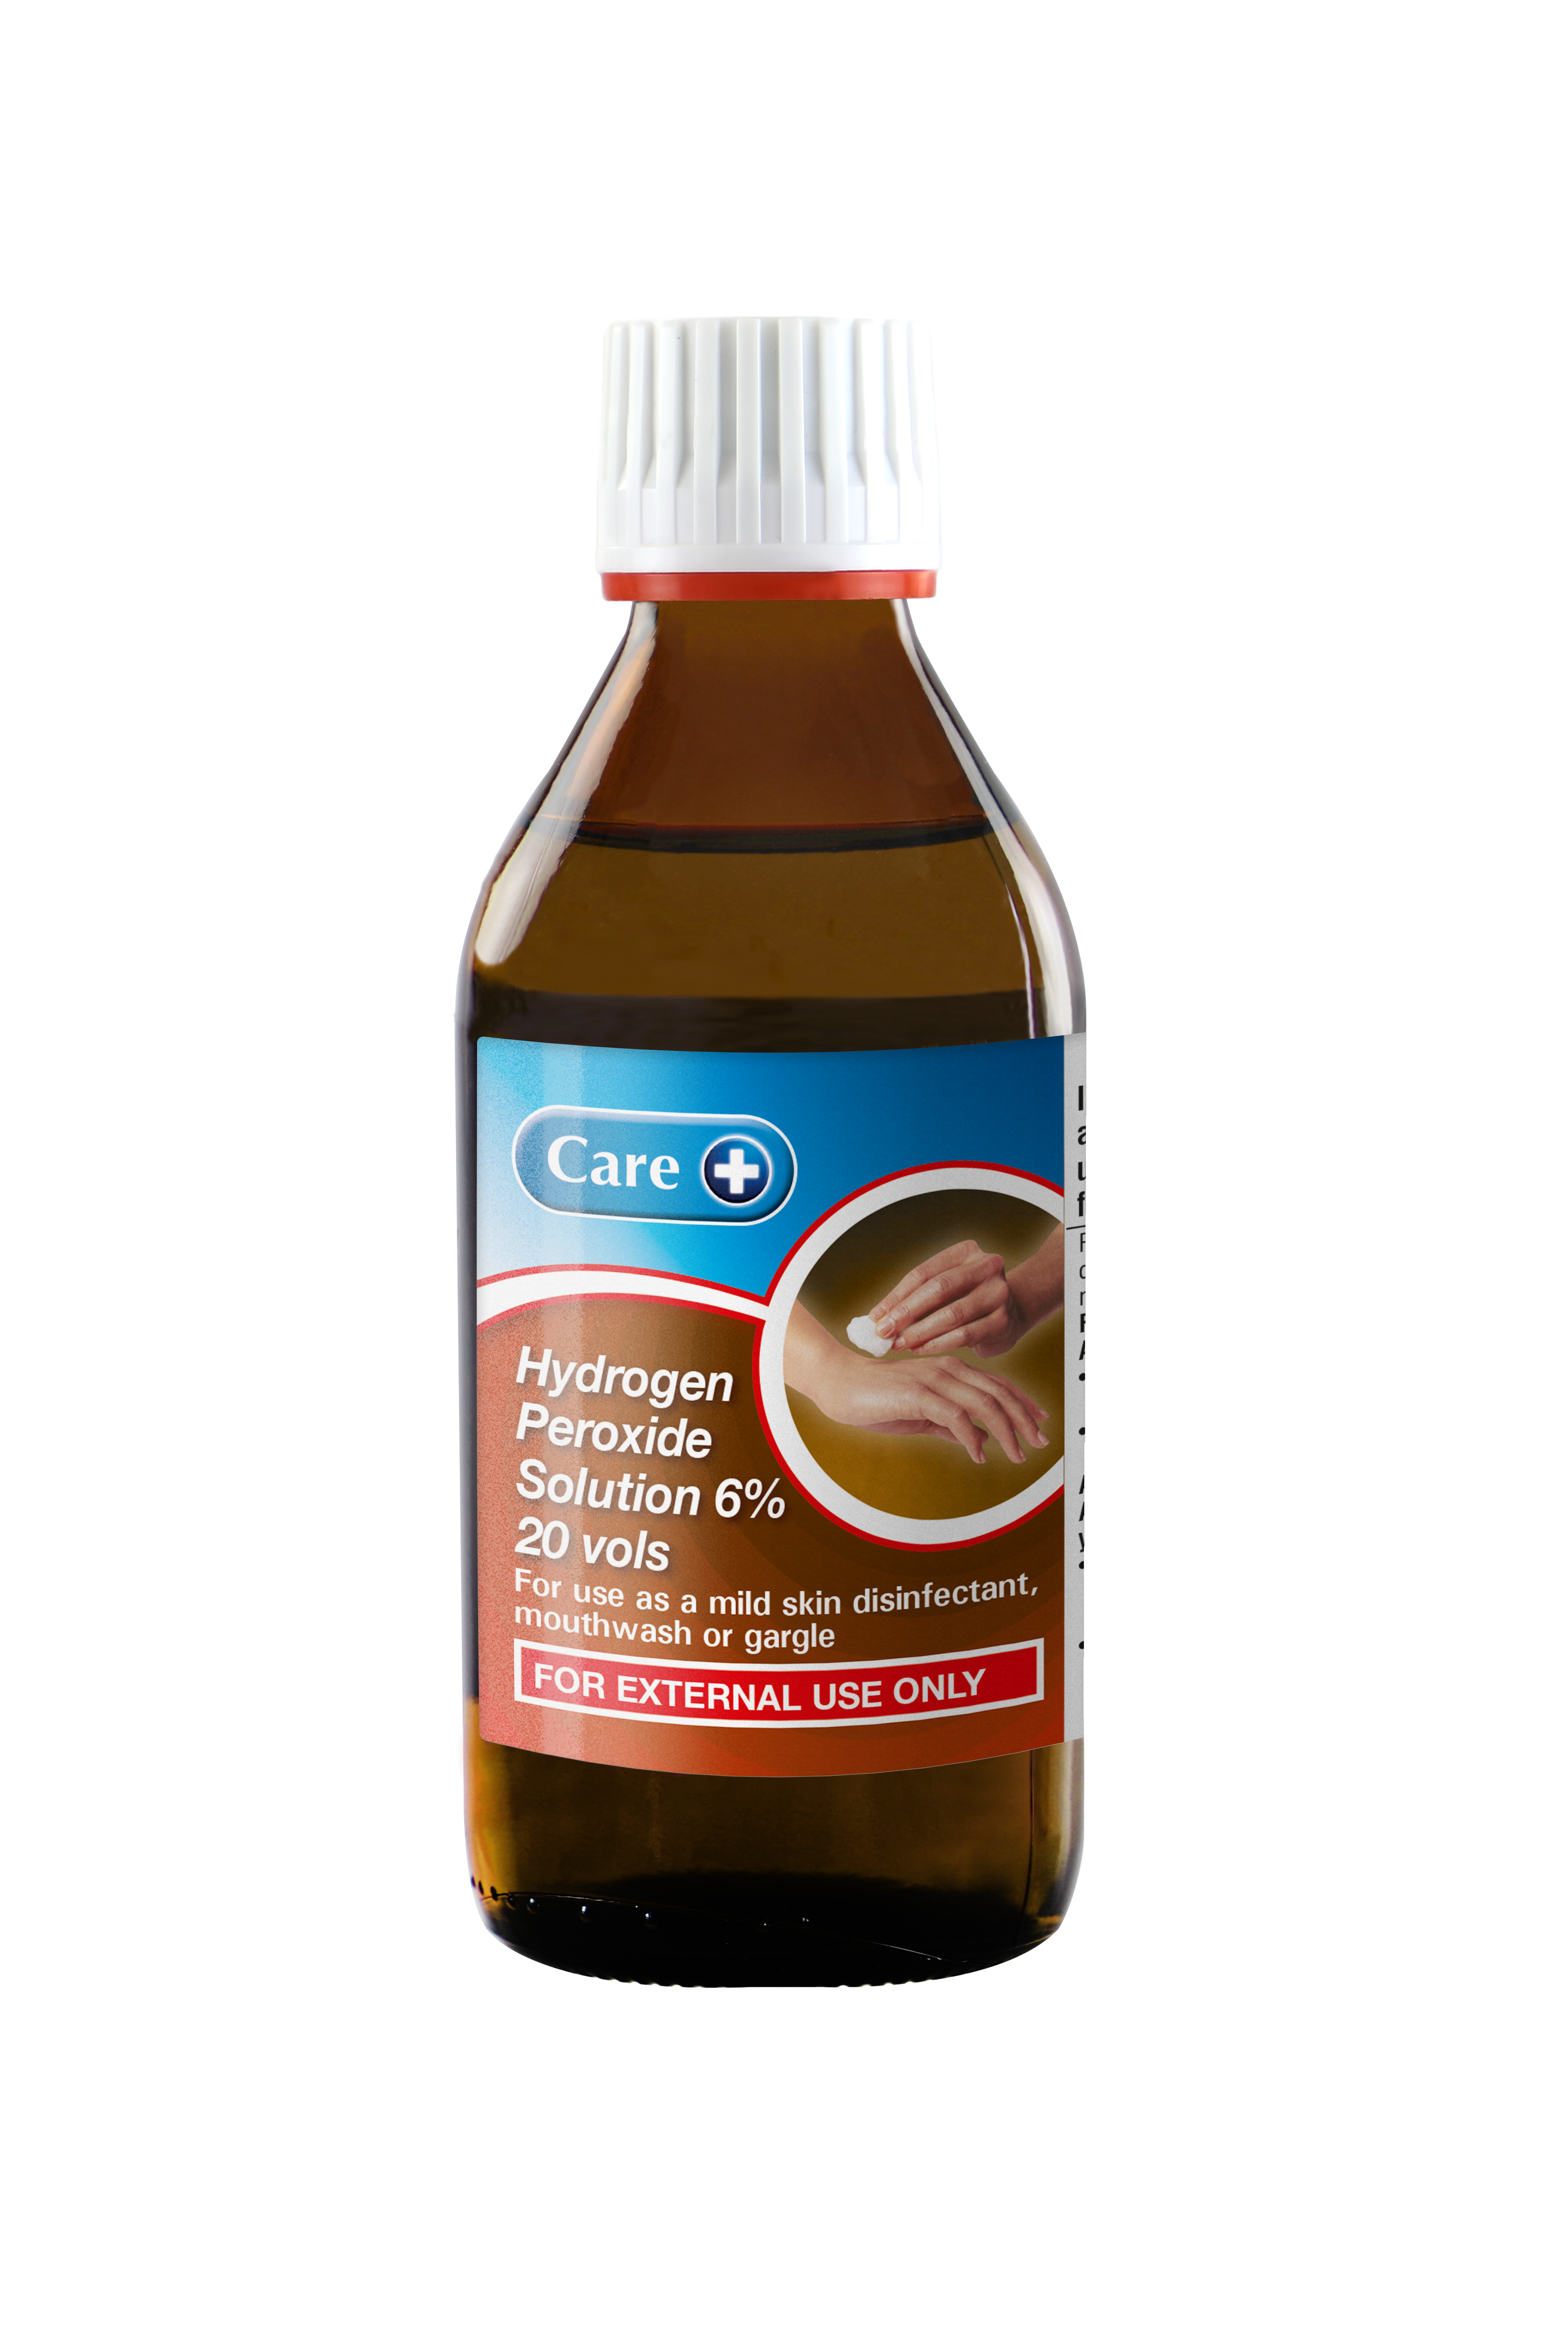 Care Hydrogen Peroxide Solution 6%